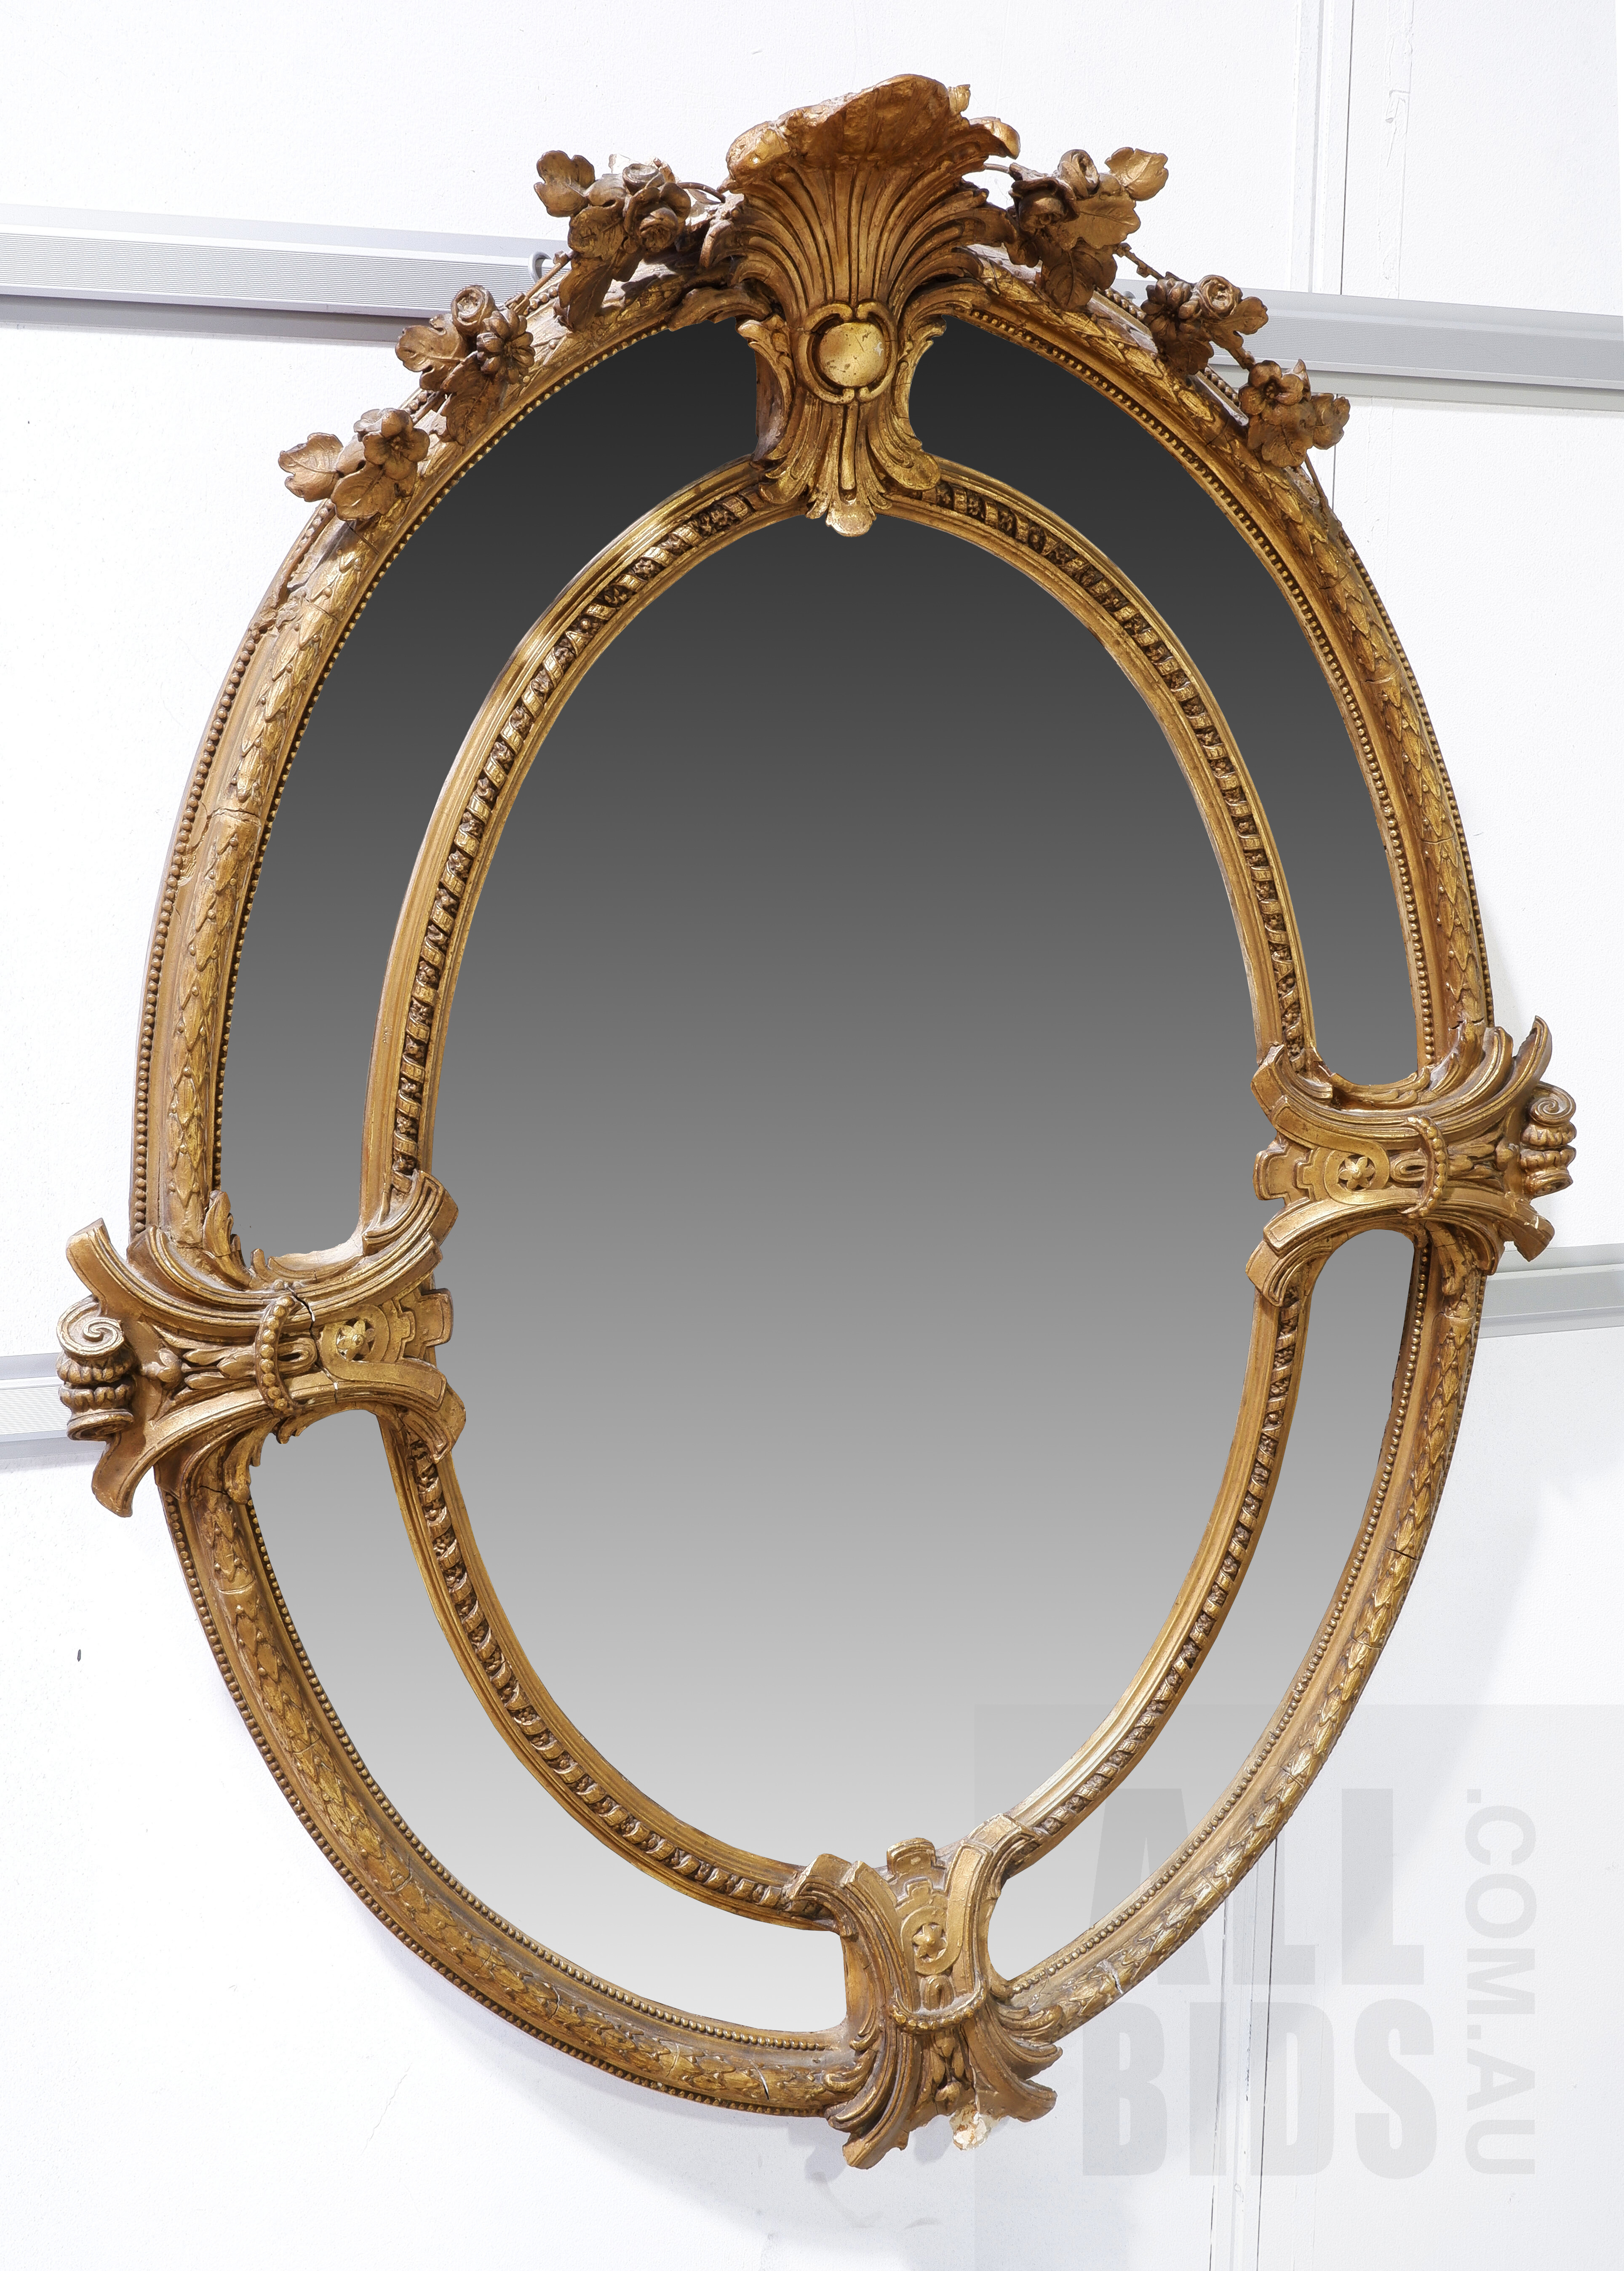 '19th Century Giltwood and Moulded Gesso Mirror, Probably French'